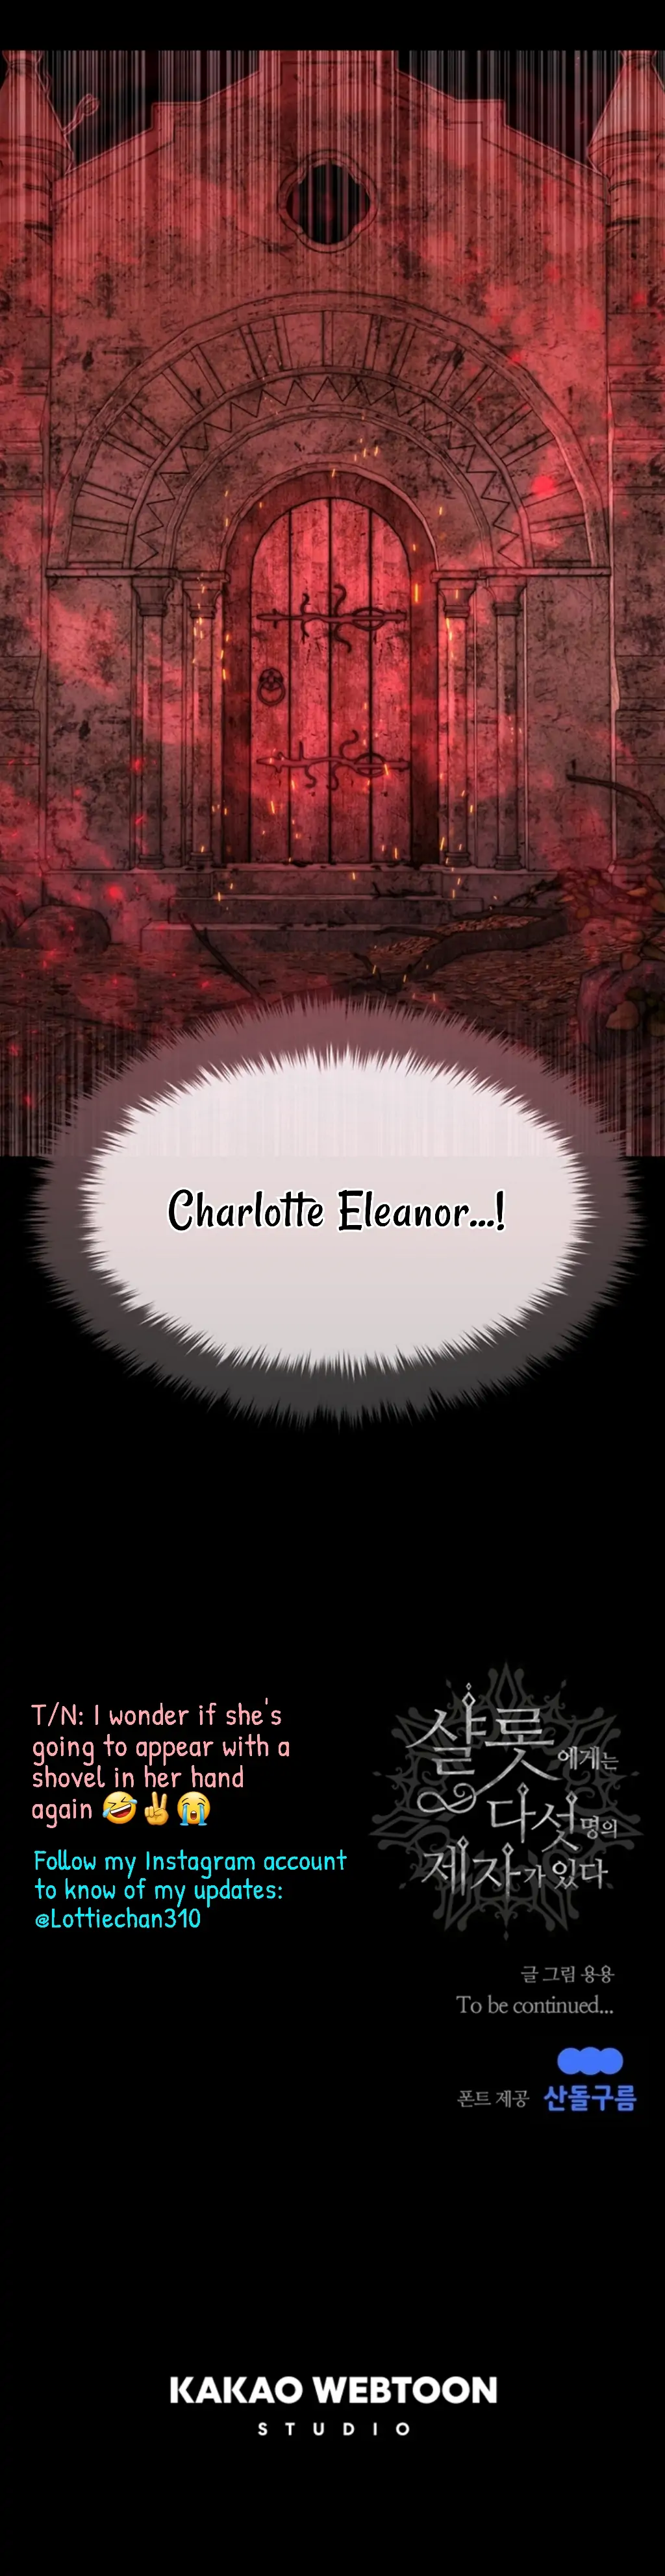 Charlotte Has Five Disciples Chapter 140